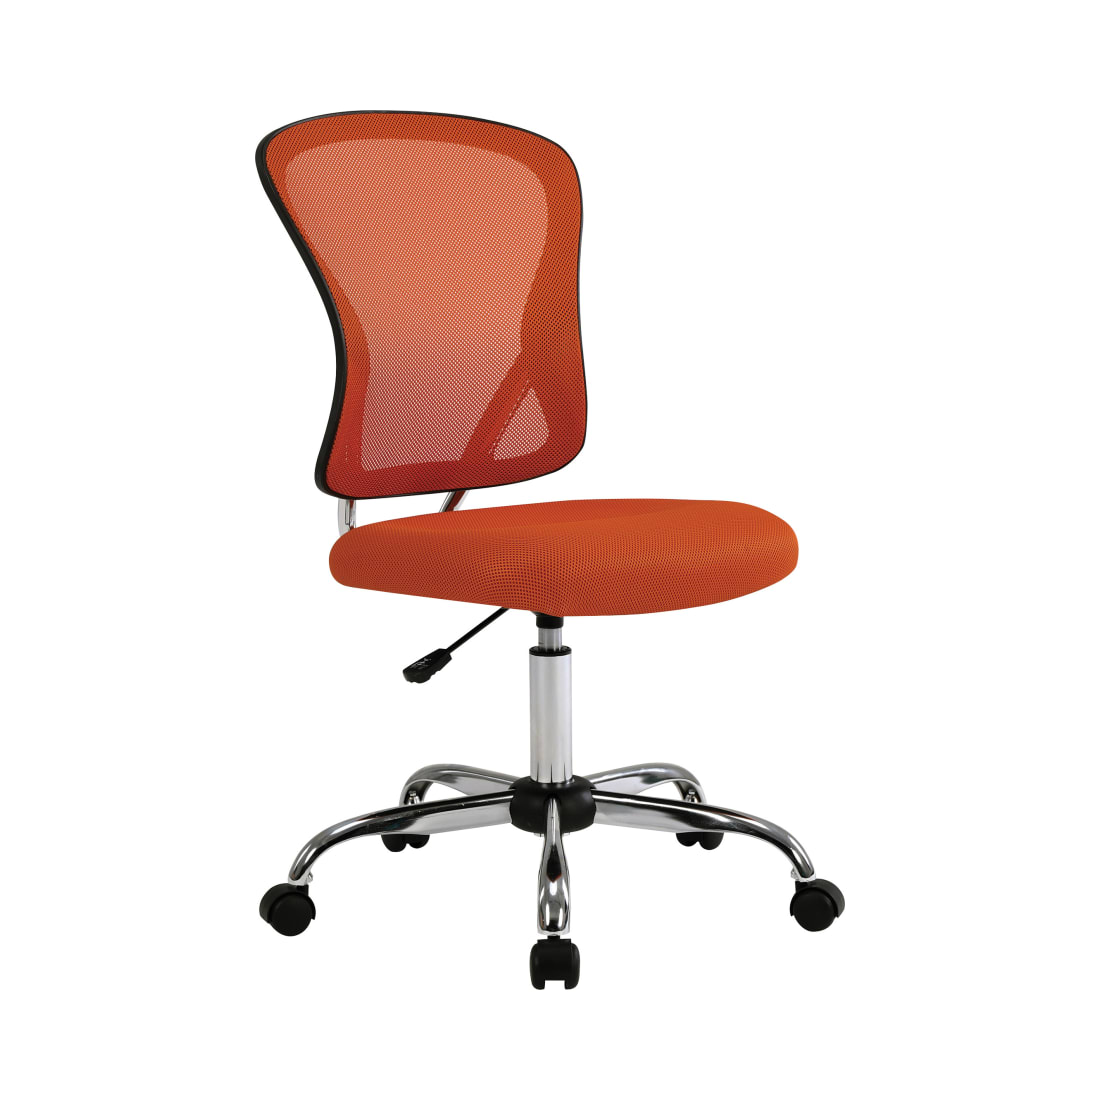 Gabriella Task Chair with Orange Mesh Seat and Back